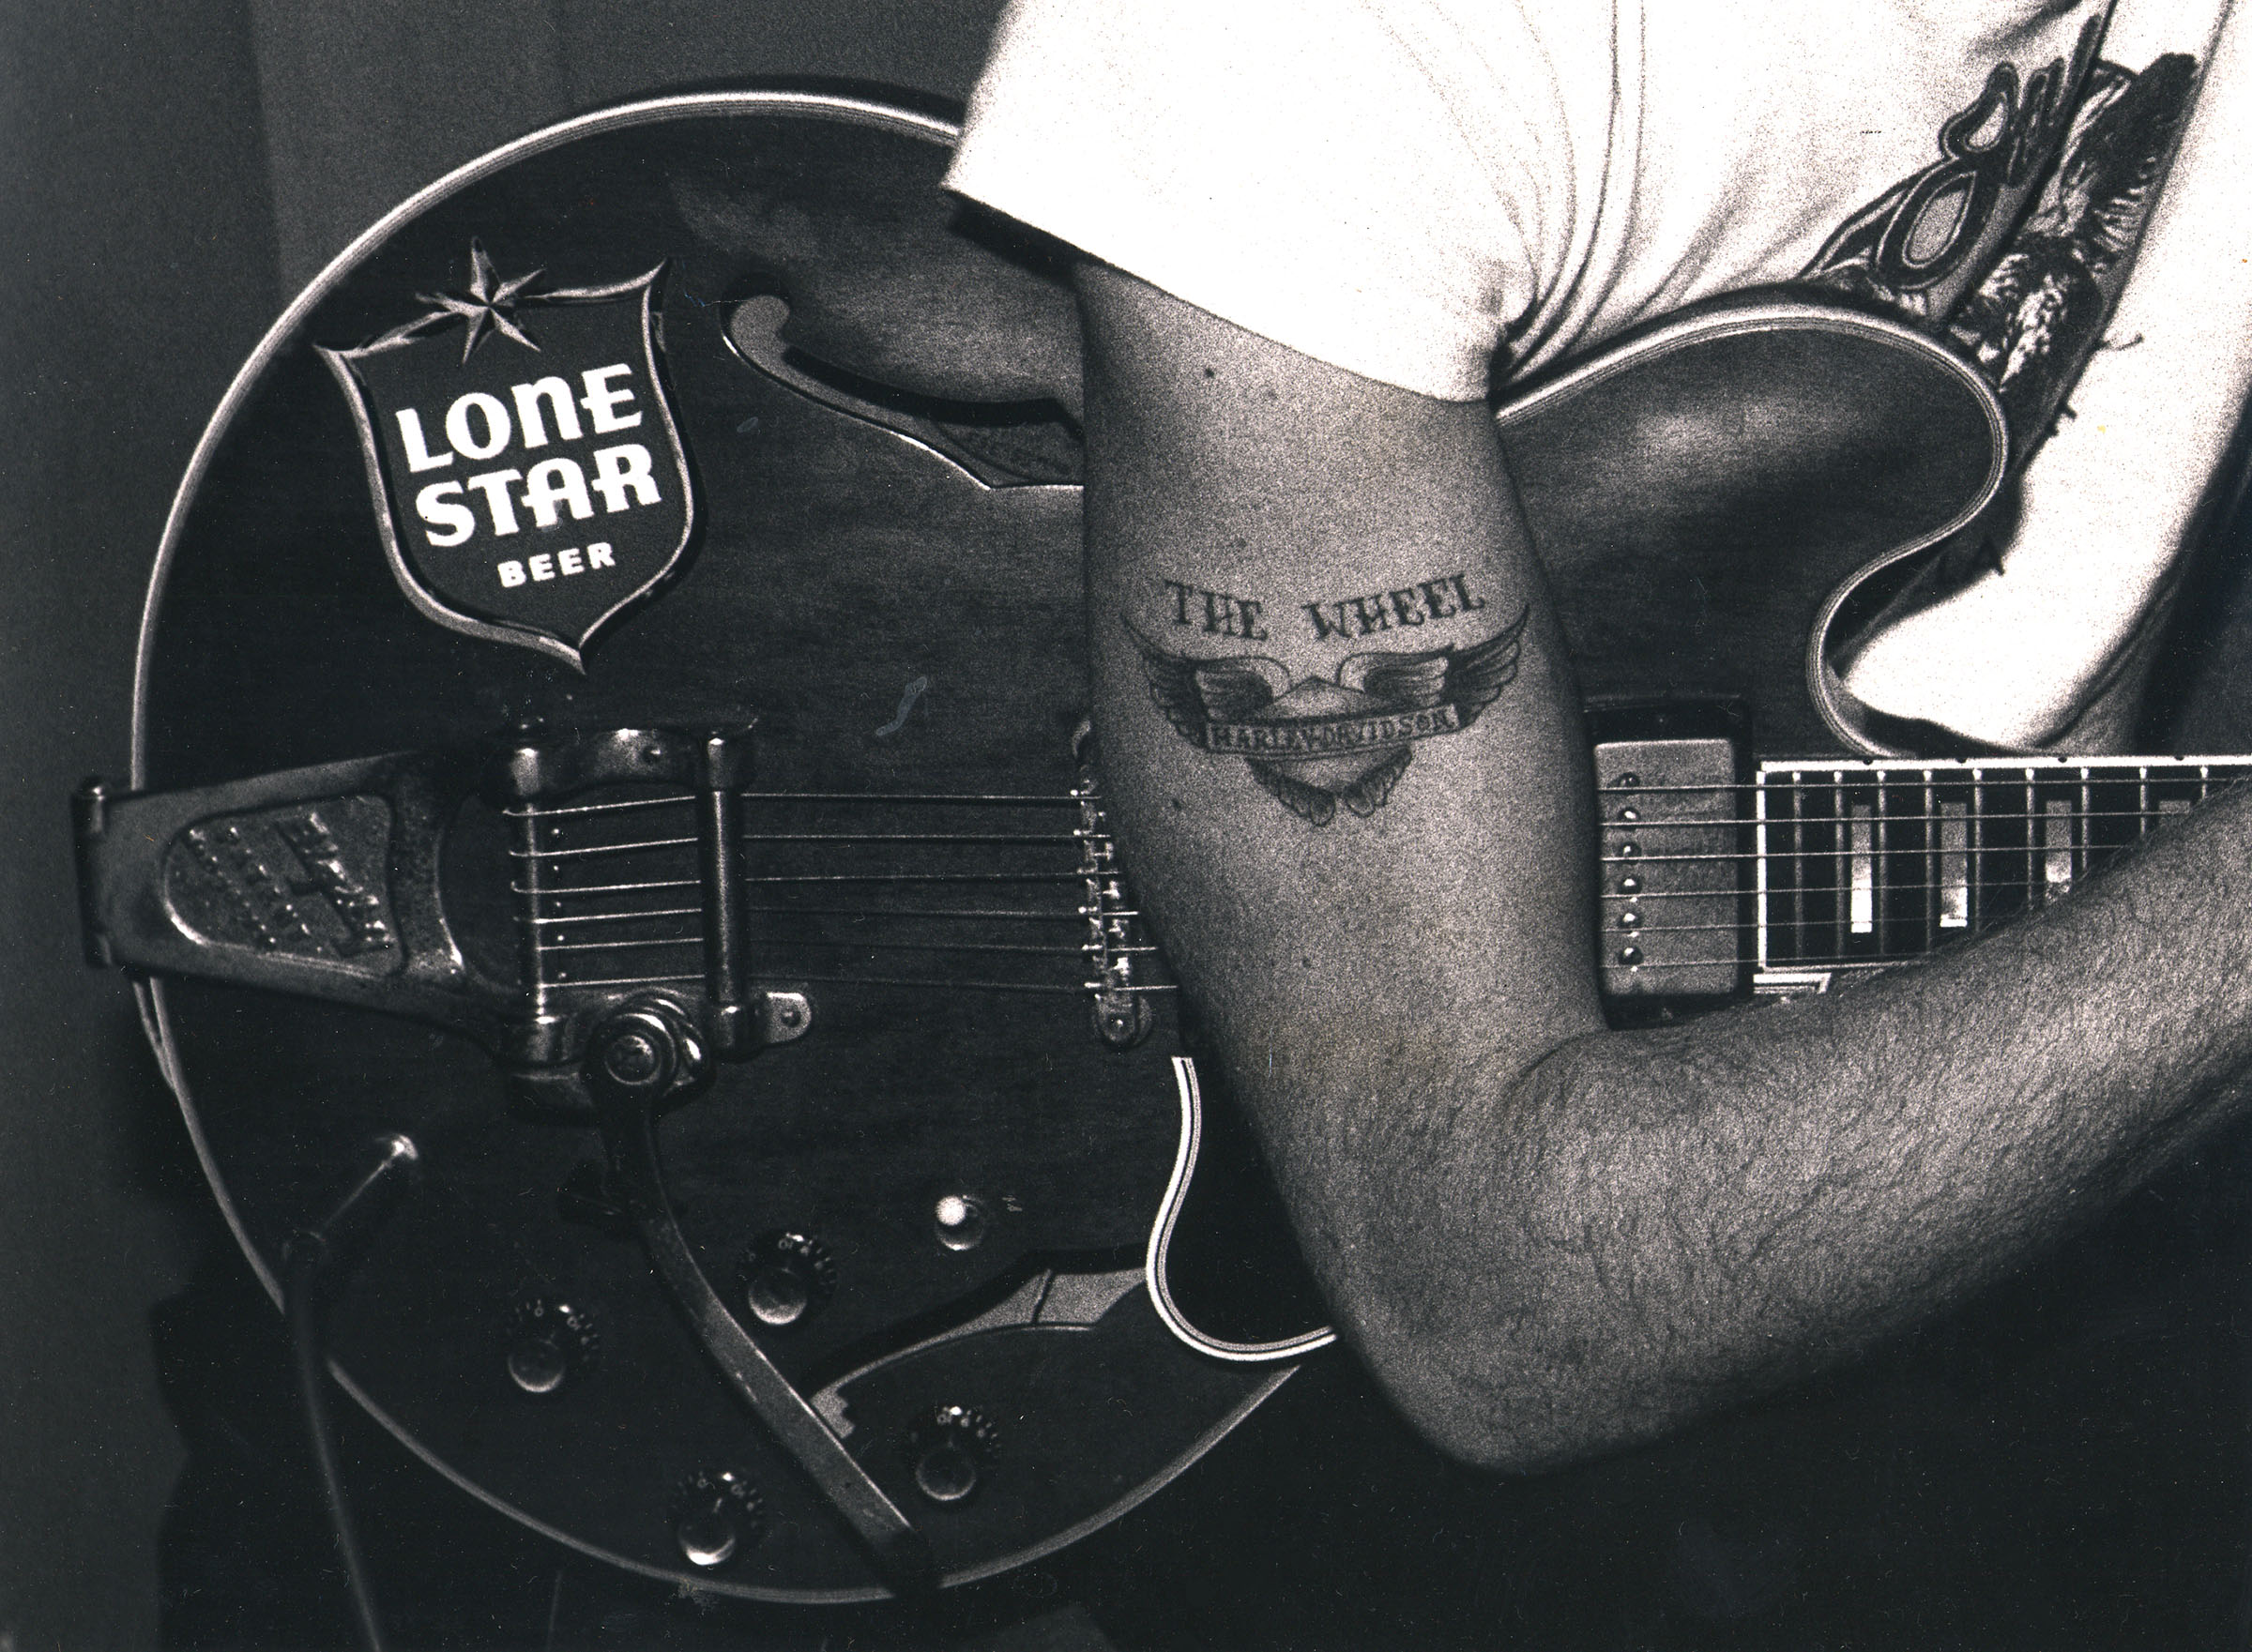 Ray Benson's arm over a guitar with an "Asleep at the Wheel" tattoo visible